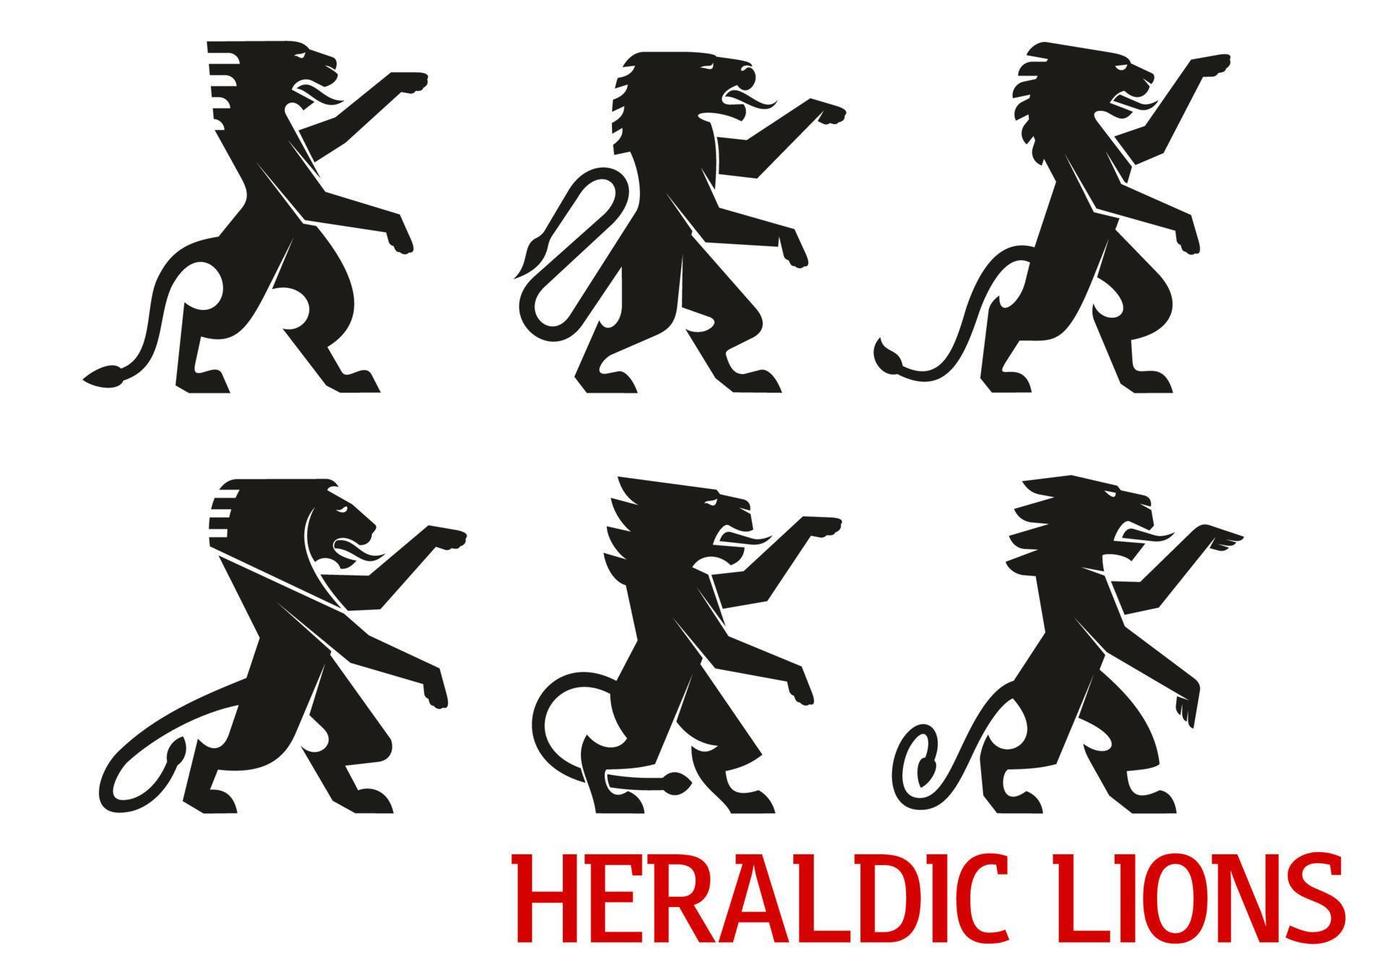 Medieval heraldic lions with raised forepaws vector